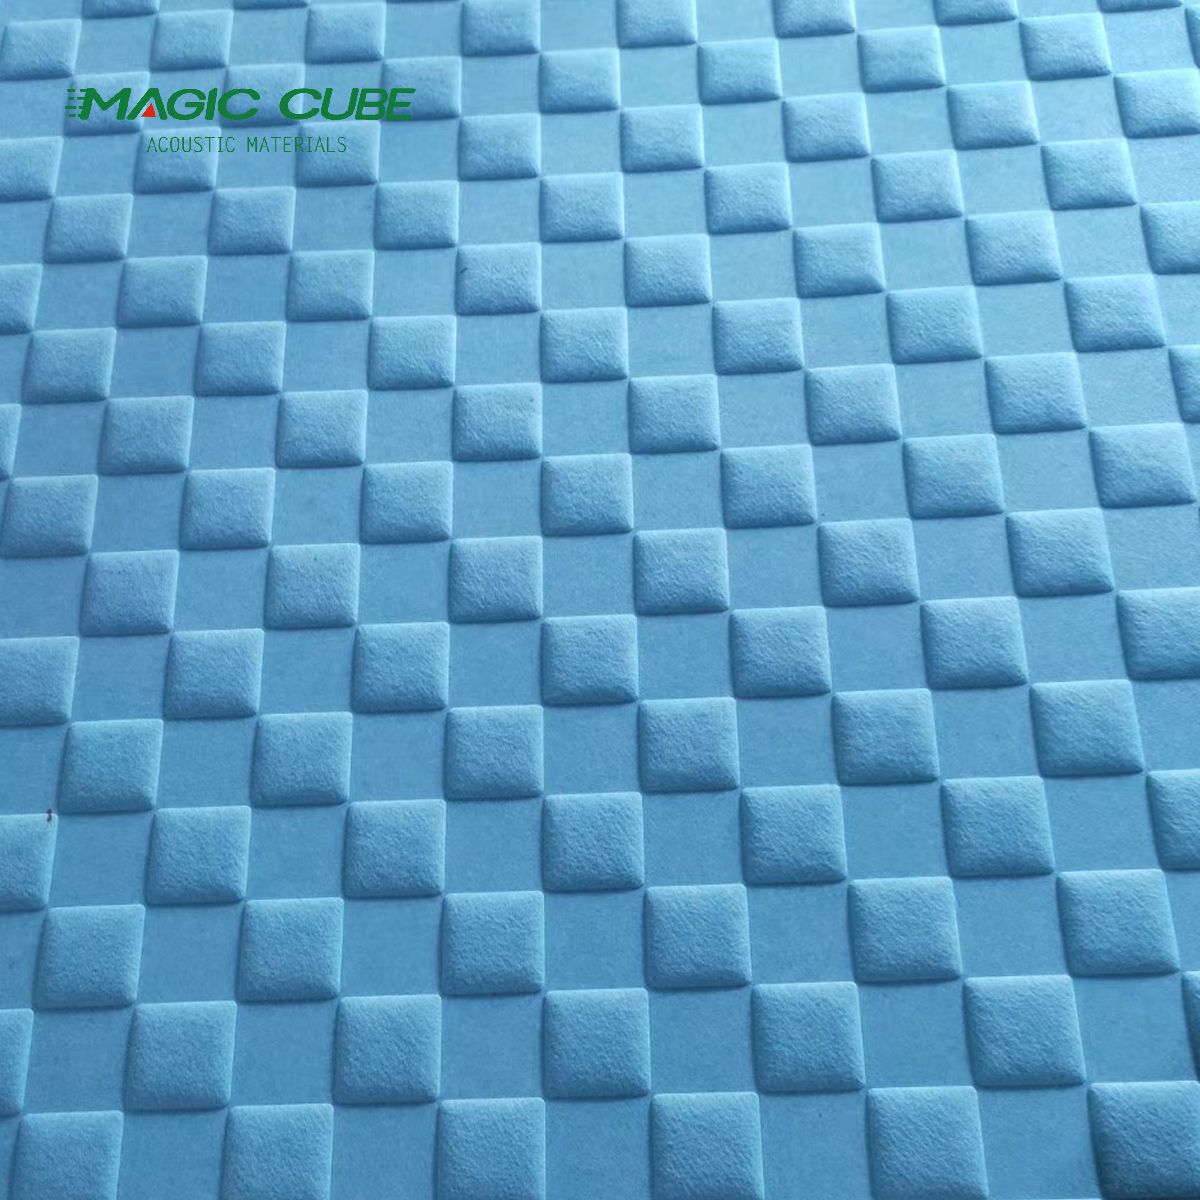 Colorful Heated-pressed 3D Acoustic Felt Panel for Commercial Buildings